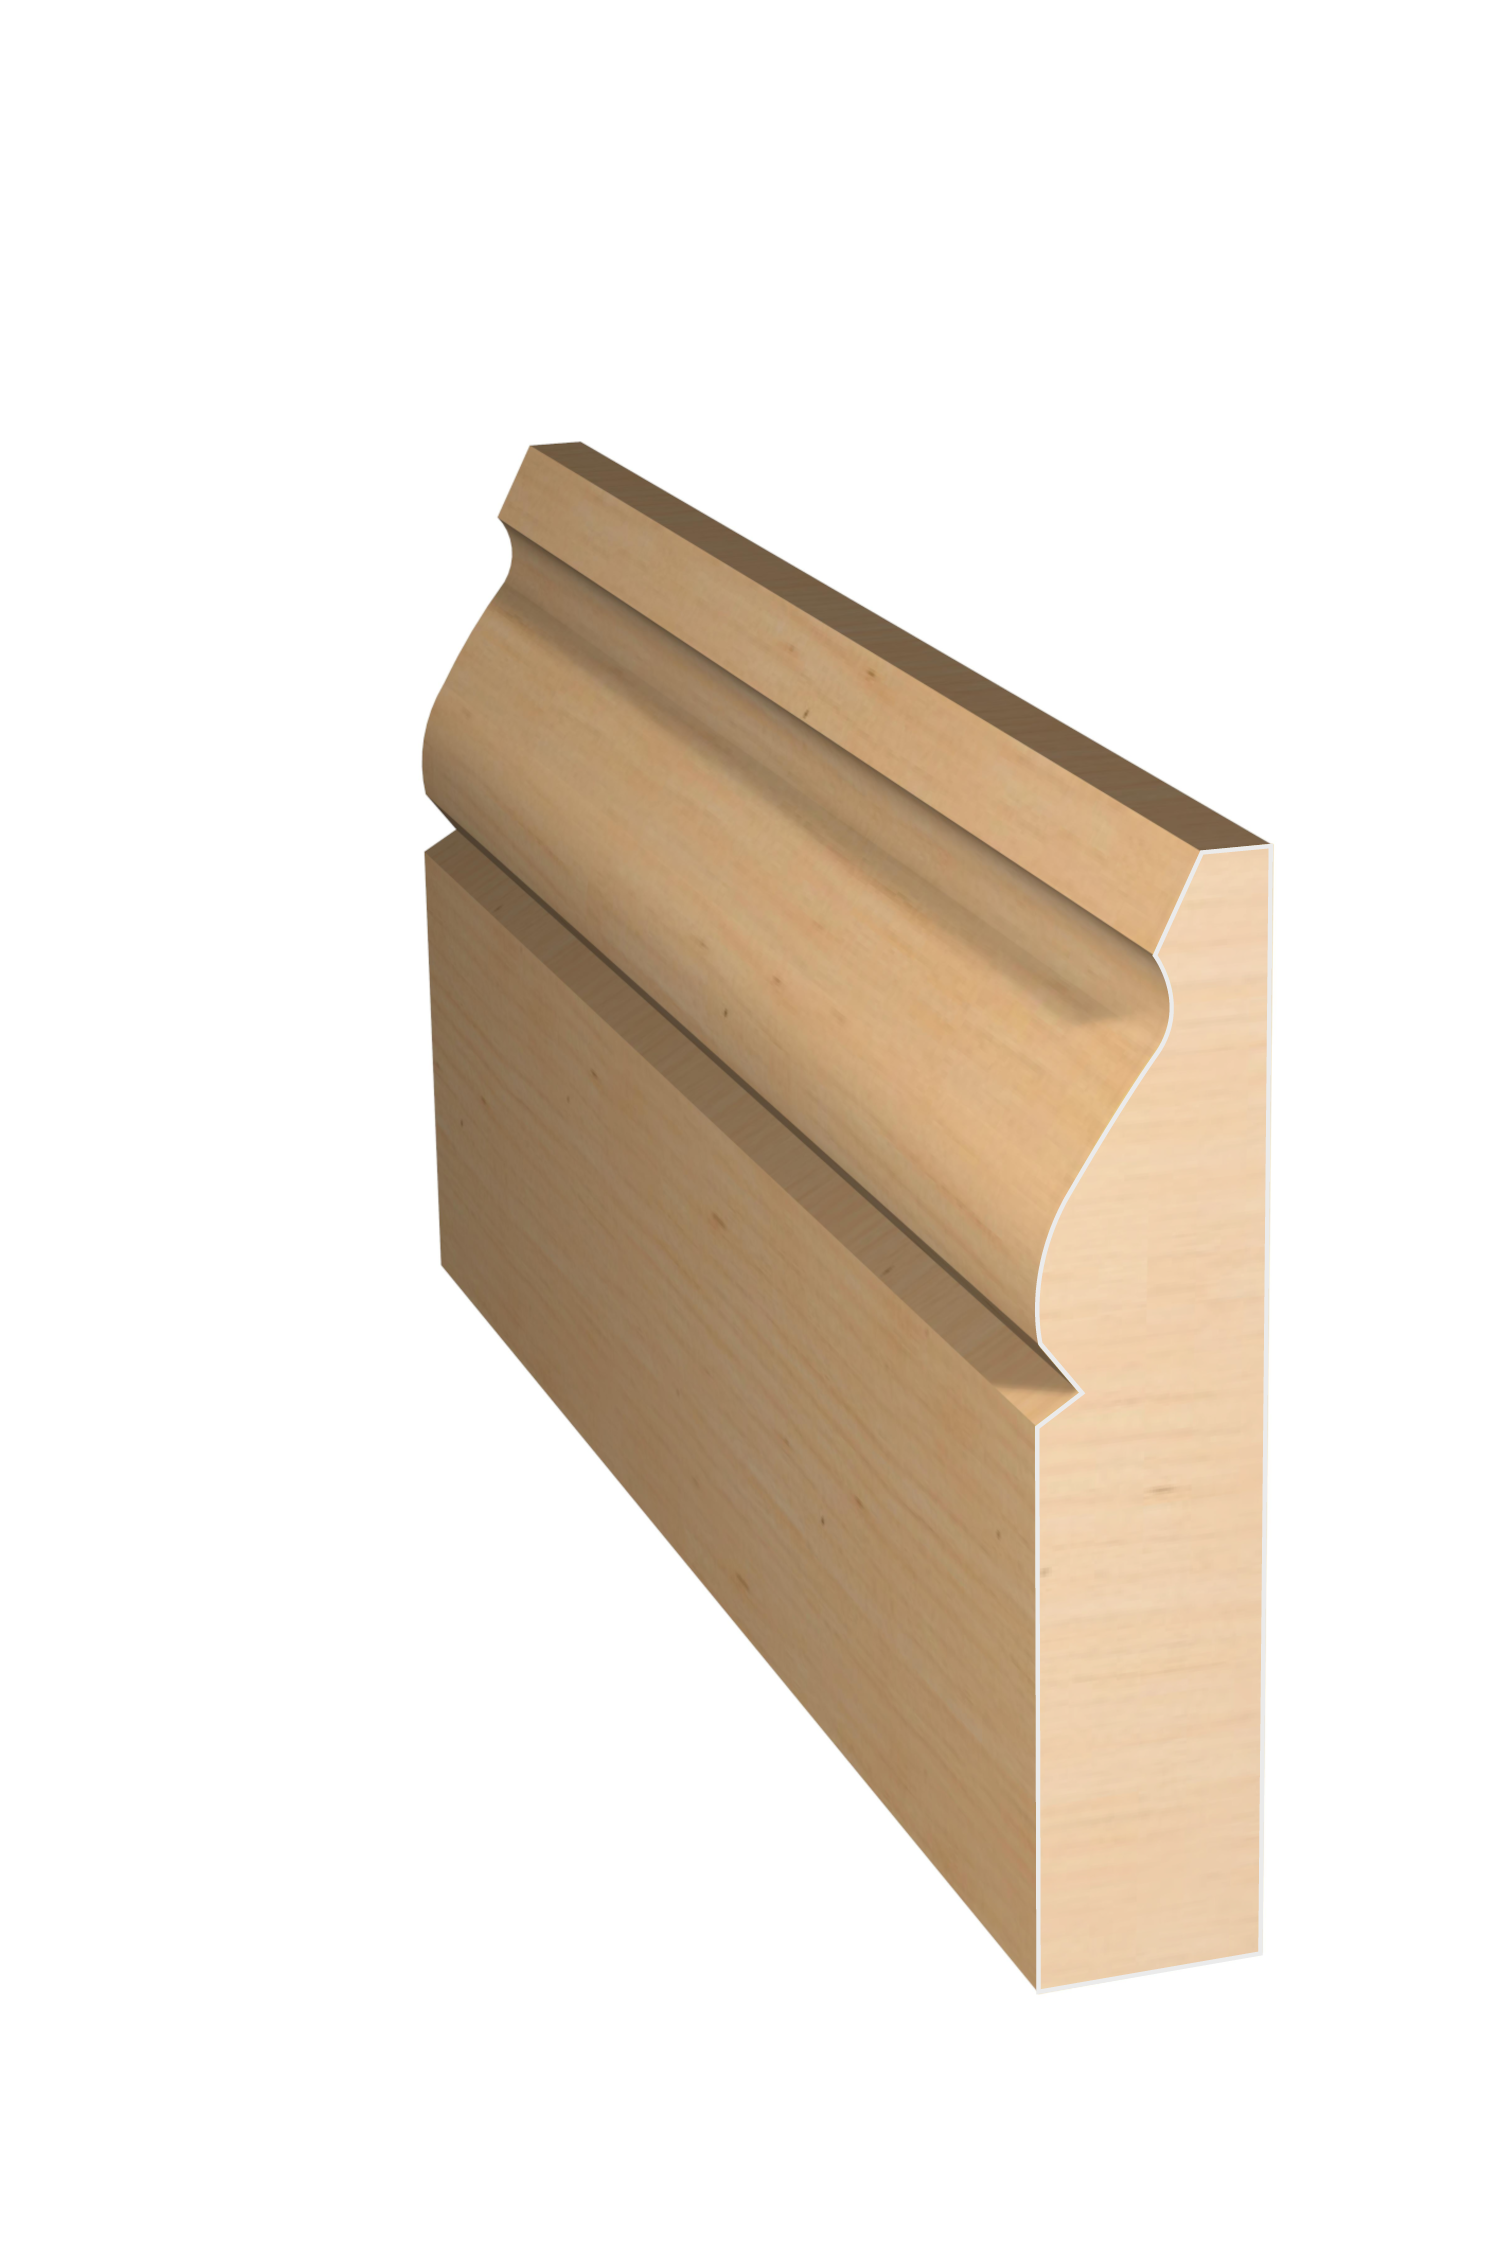 Three dimensional rendering of custom casing wood molding CAPL329 made by Public Lumber Company in Detroit.